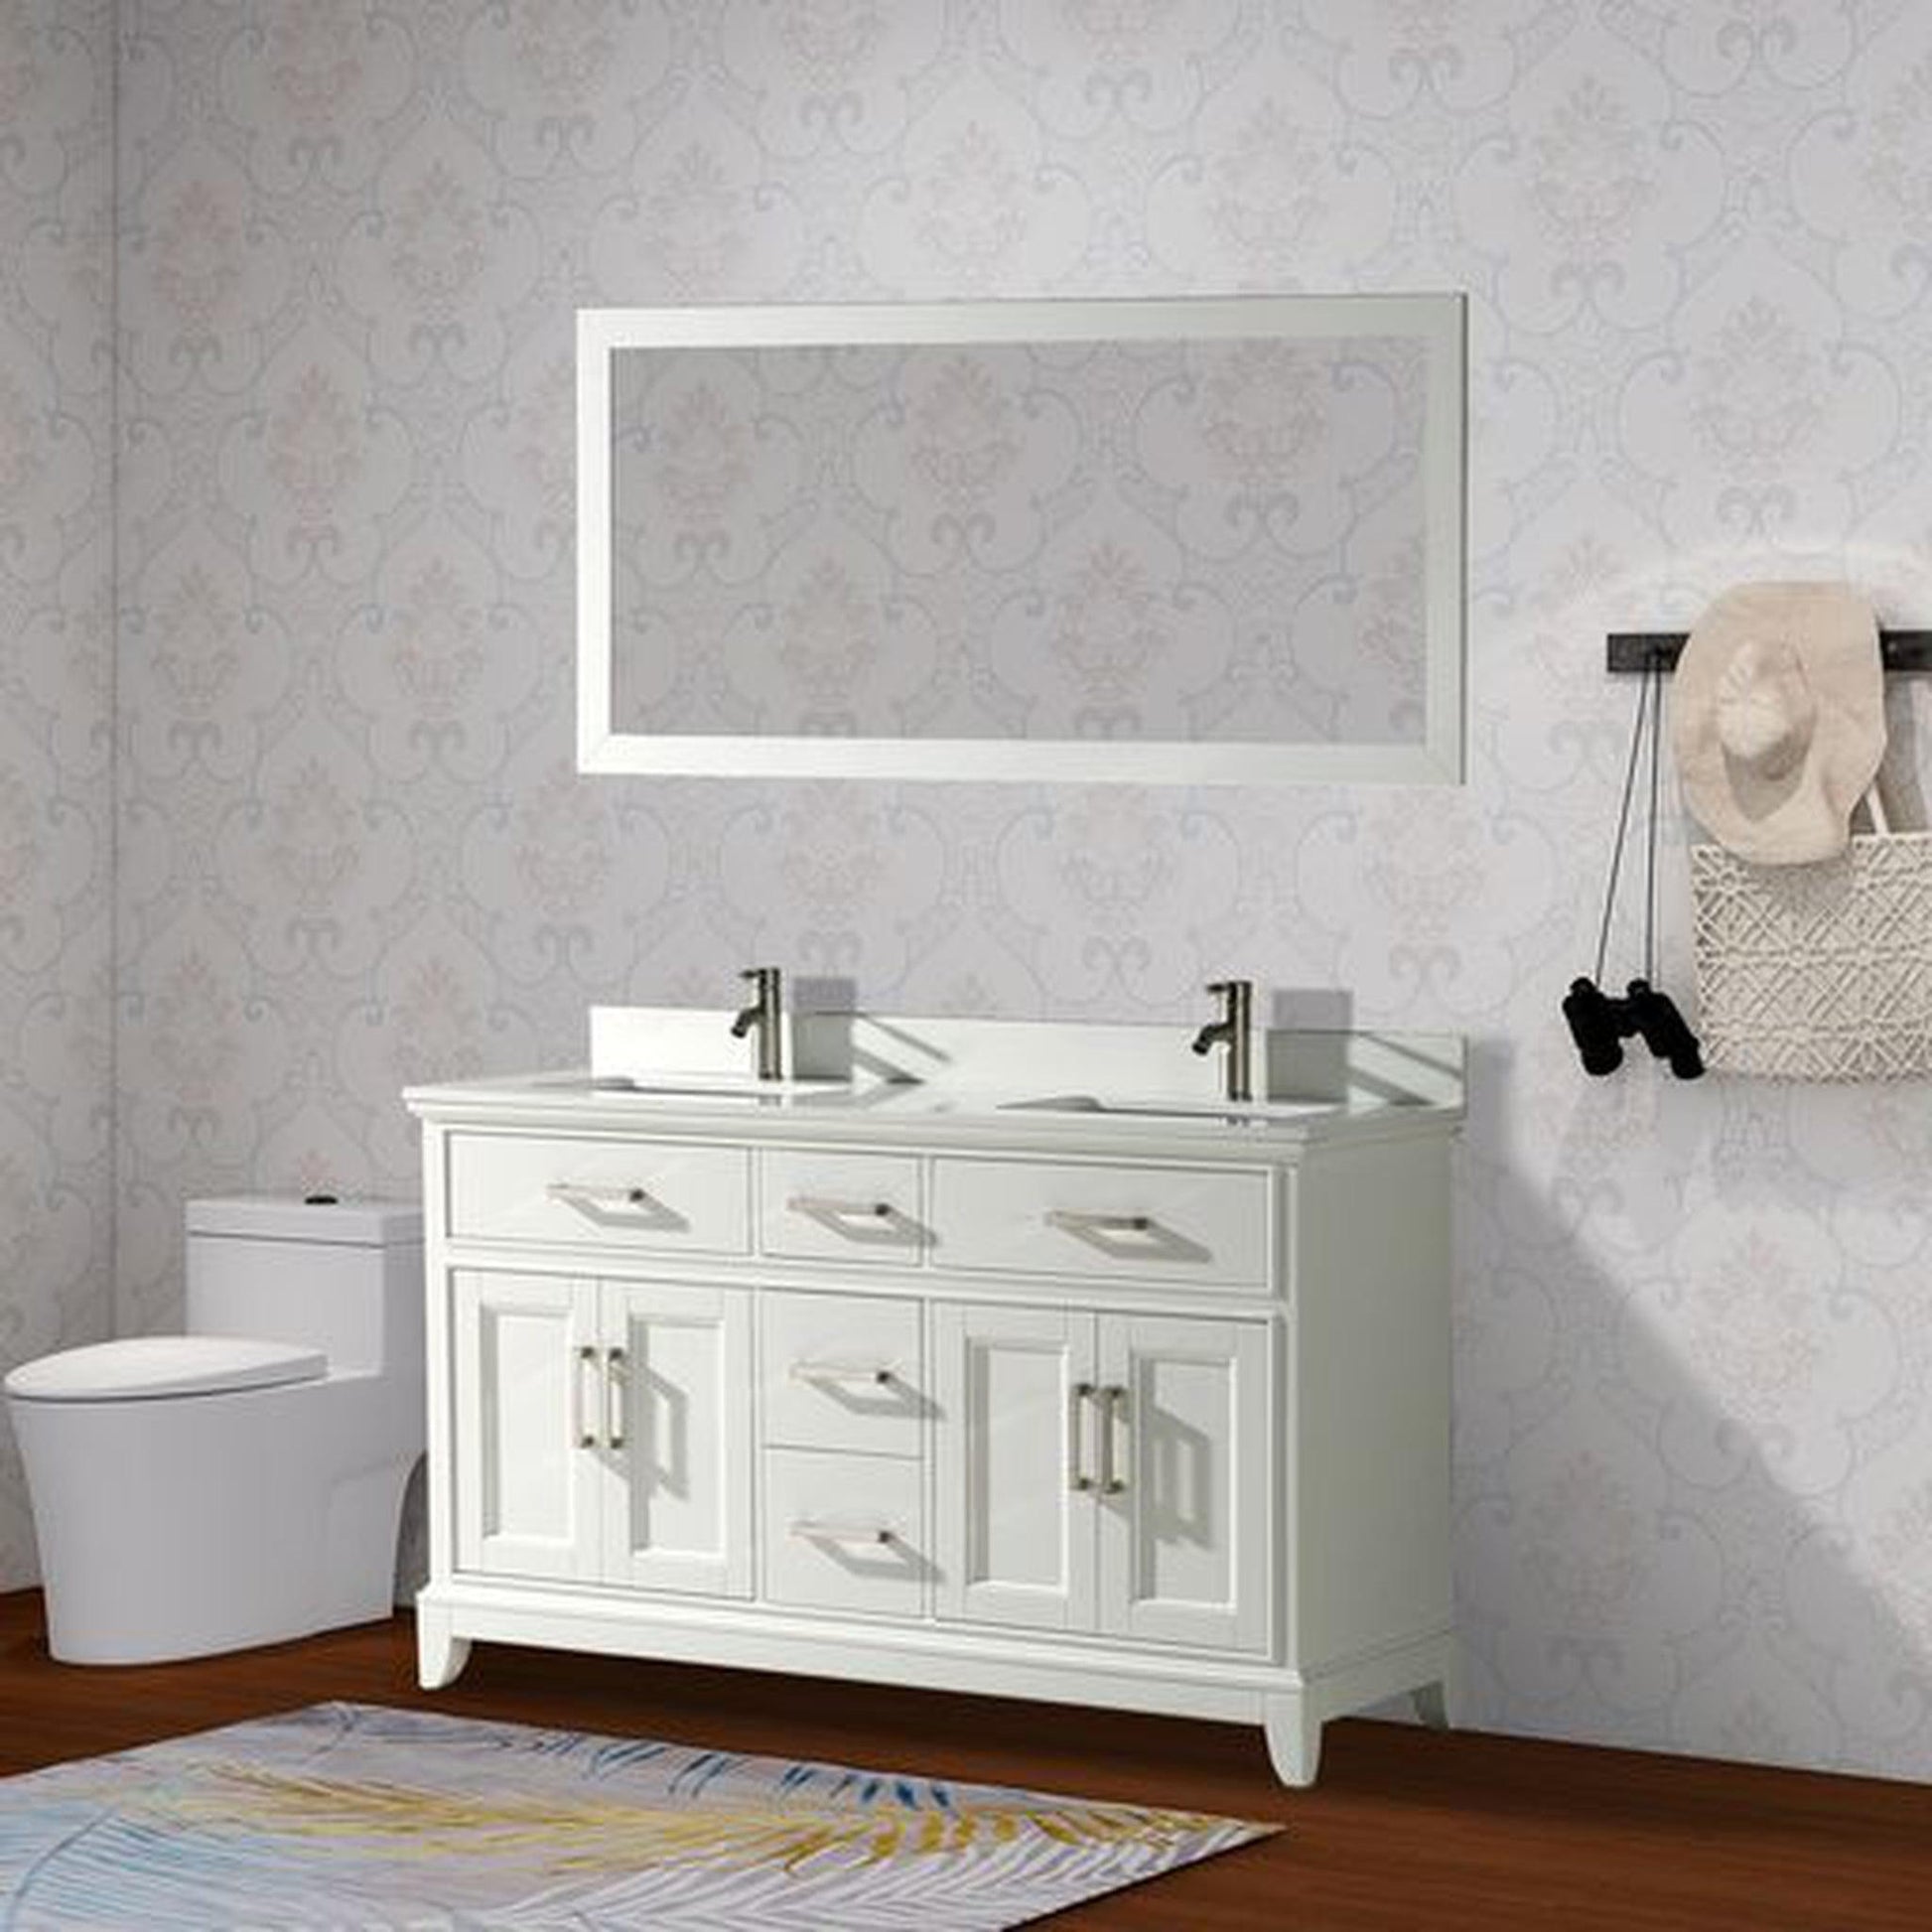 30 Bathroom Vanity With White Ceramic Basin And Adjustable Open